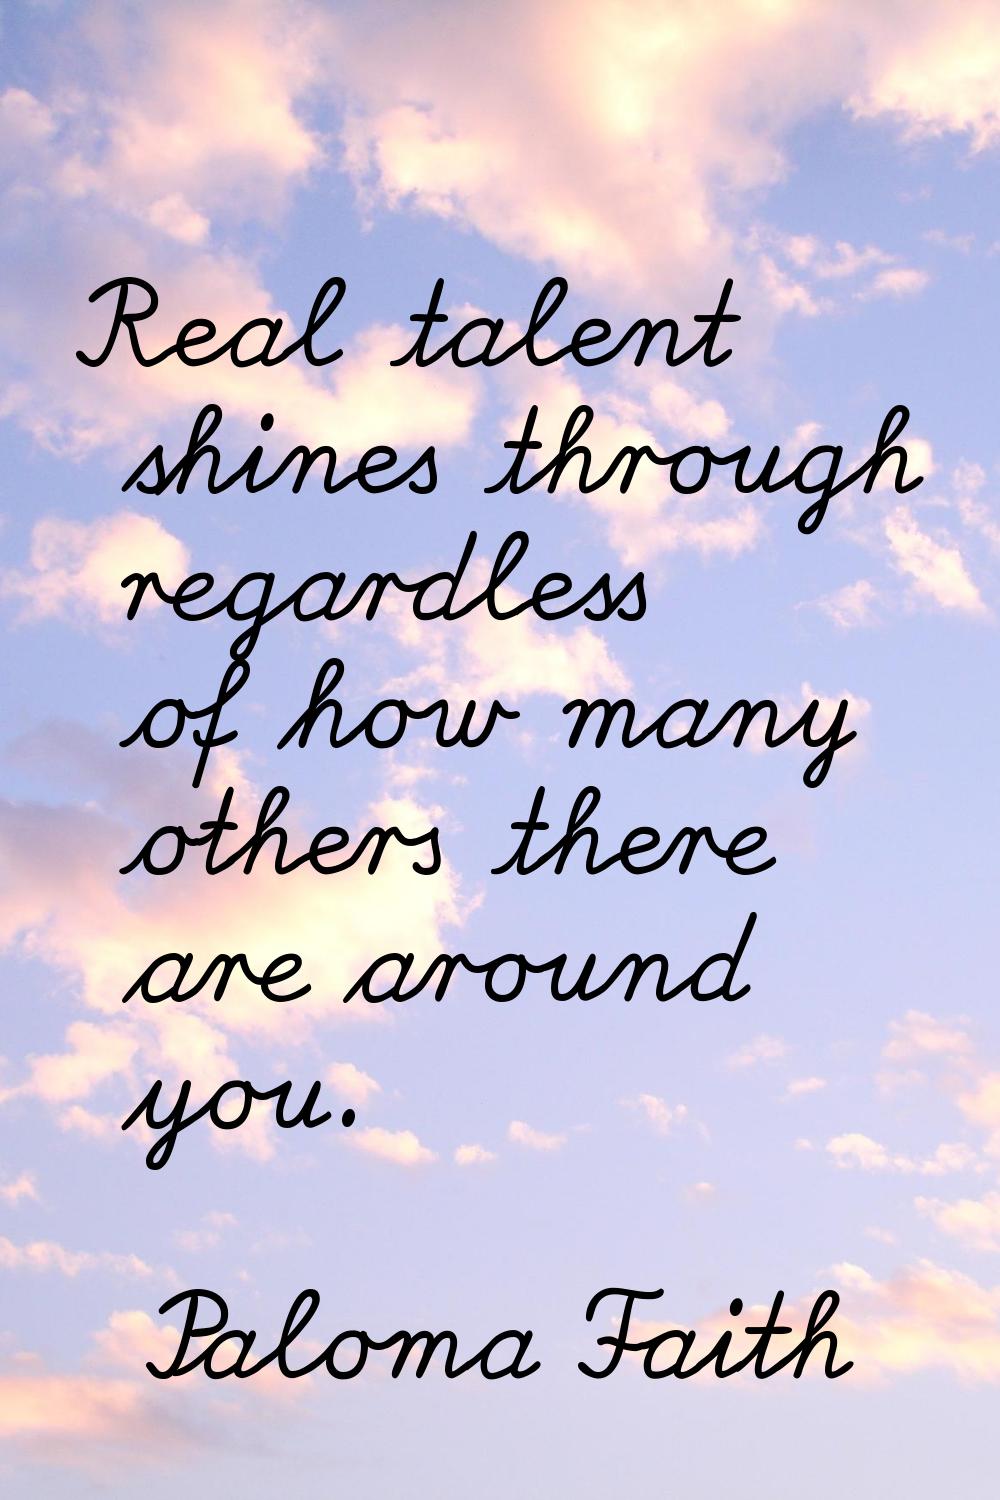 Real talent shines through regardless of how many others there are around you.